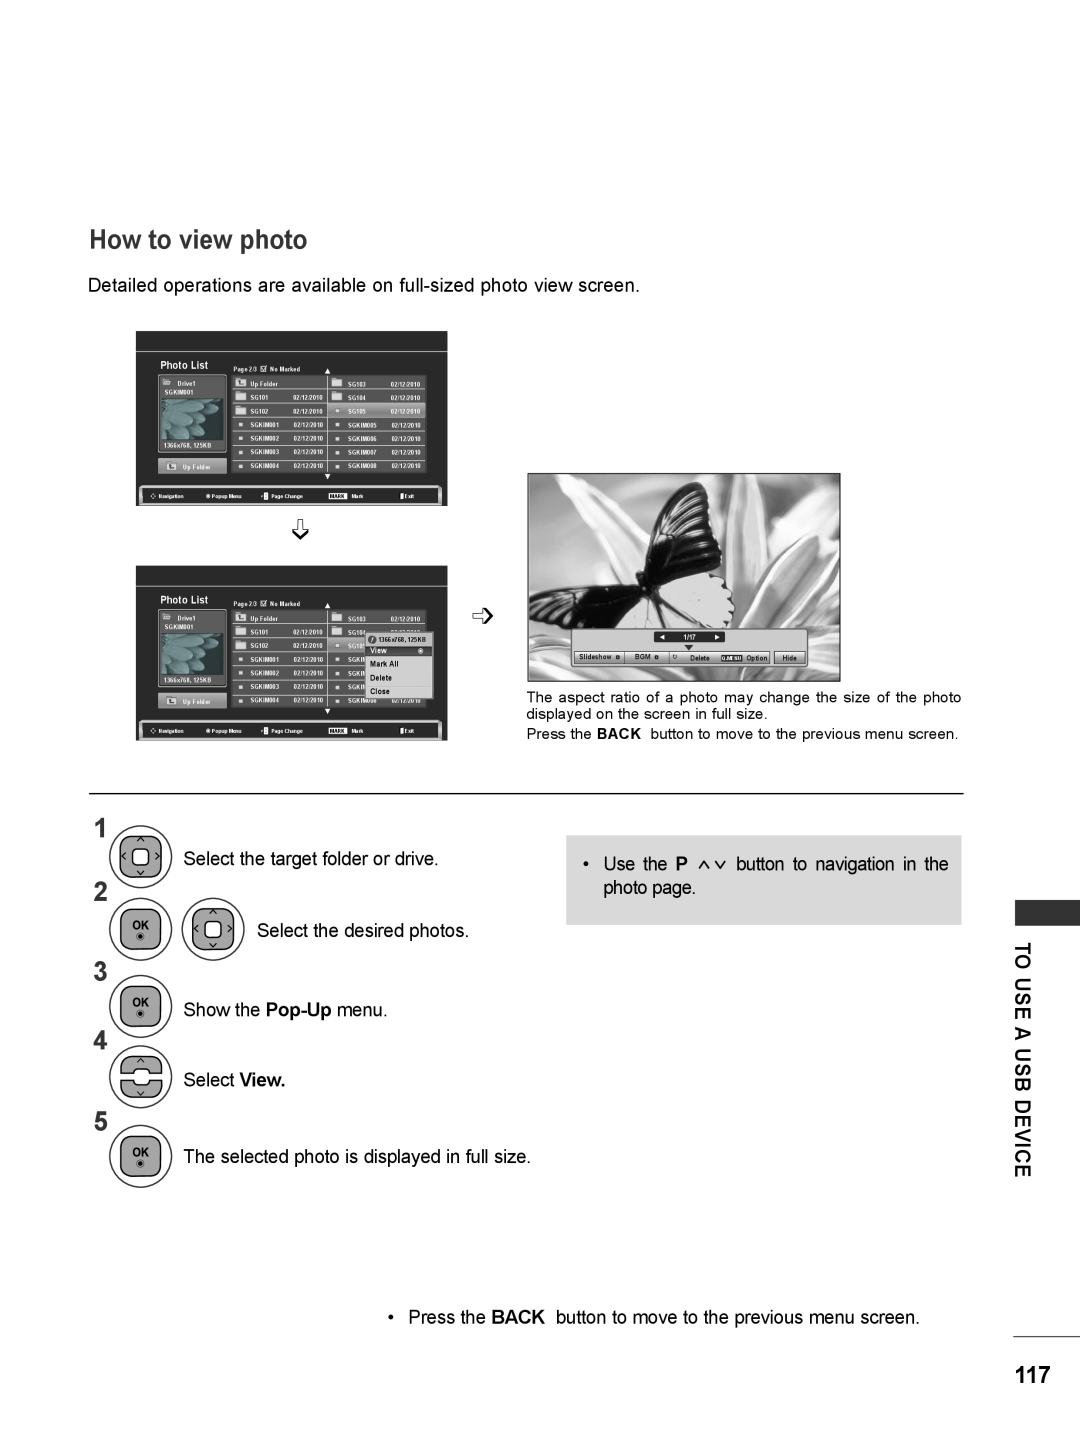 LG Electronics M2780DF, M2780DN, M2380DN, M2380DB How to view photo, To Use A Usb Device, Photo List, Mark All, Delete 